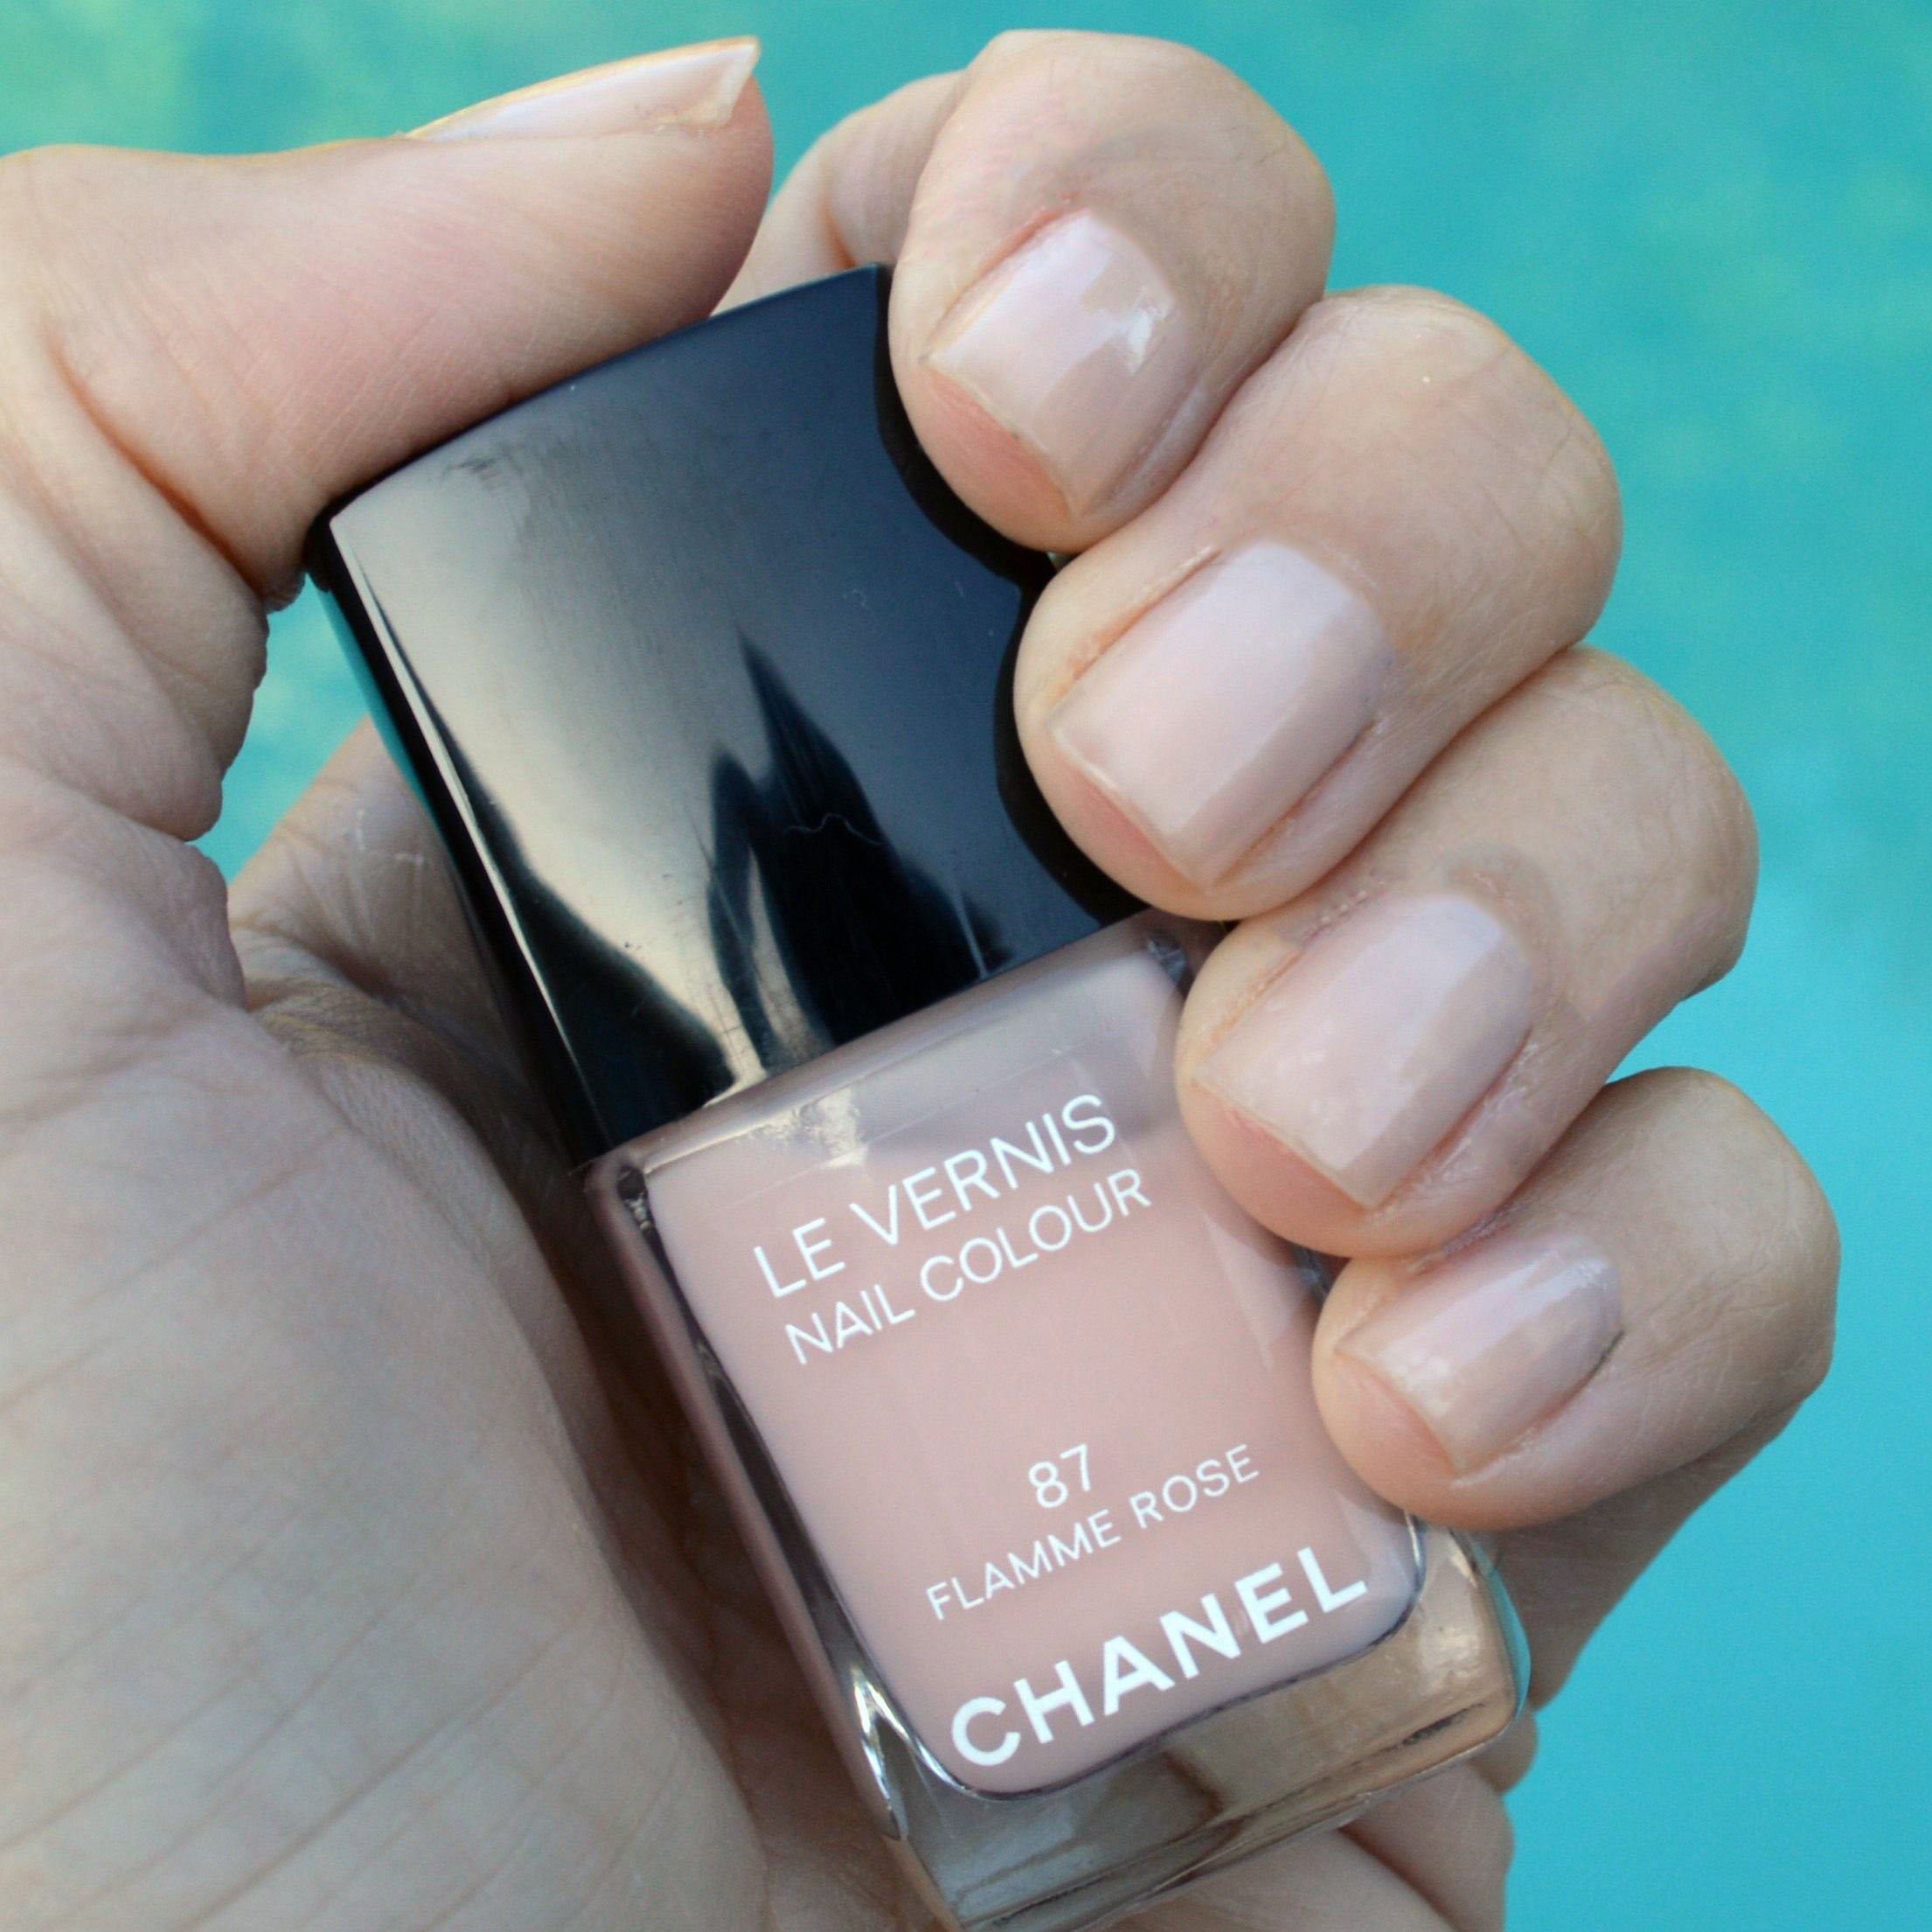 Chanel Flamme Rose nail polish review – Bay Area Fashionista